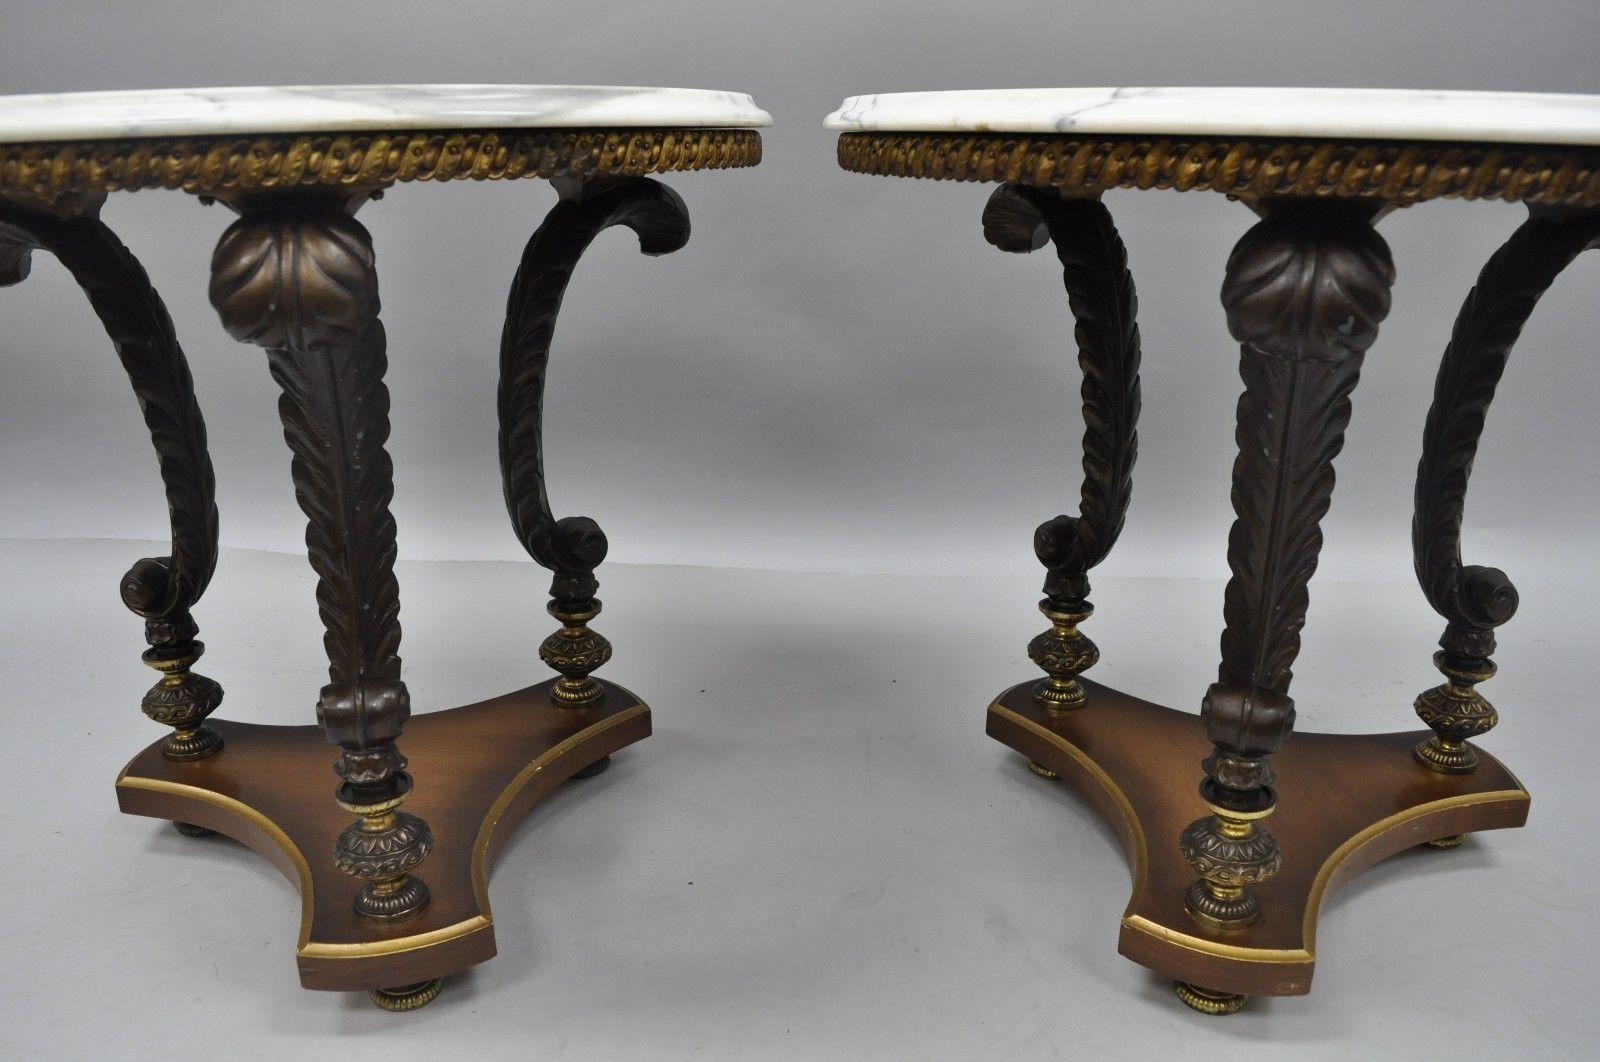 Pair of vintage Hollywood Regency French style marble-top side tables. Round marble tops, white metal plume supports, wooden base, metal feet, circa mid-20th century. Measurements: 22